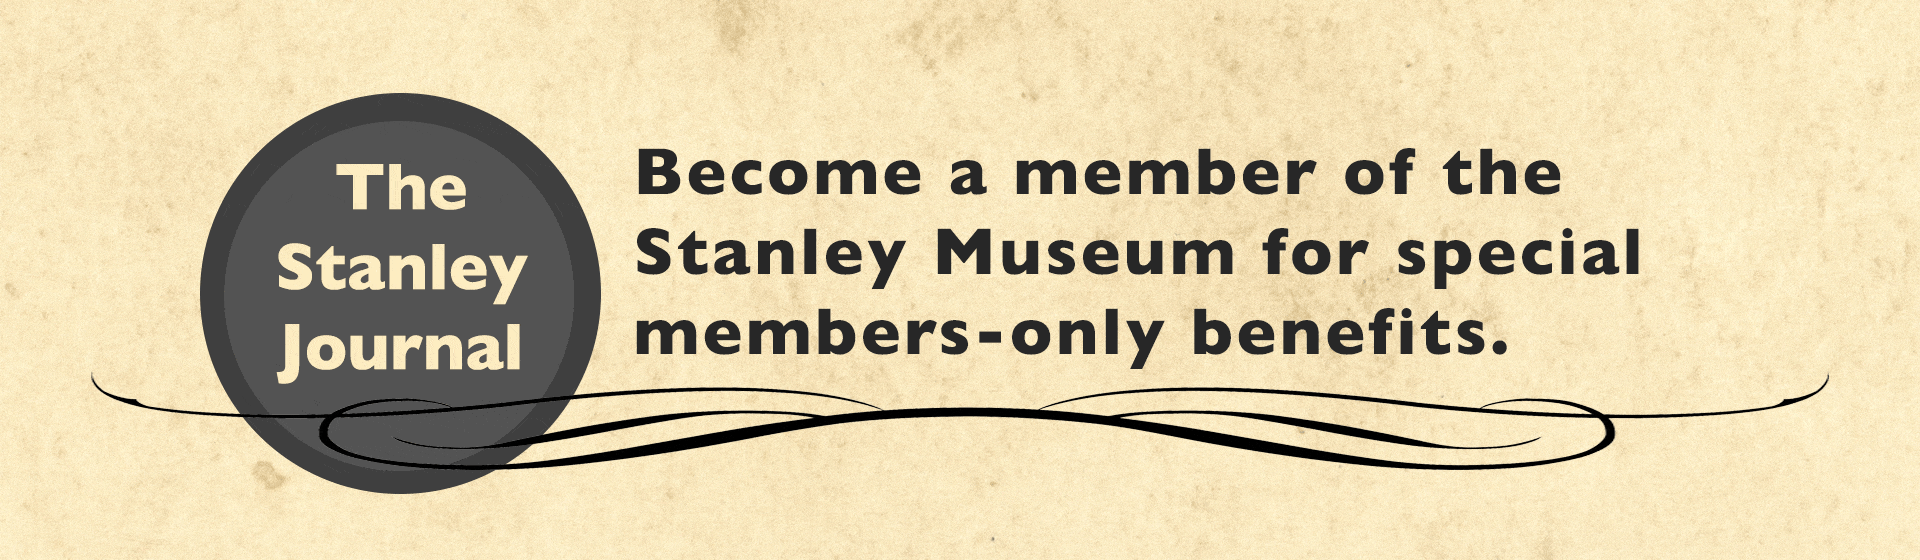 Become a Member of the Stanley Museum for special members-only benefits.